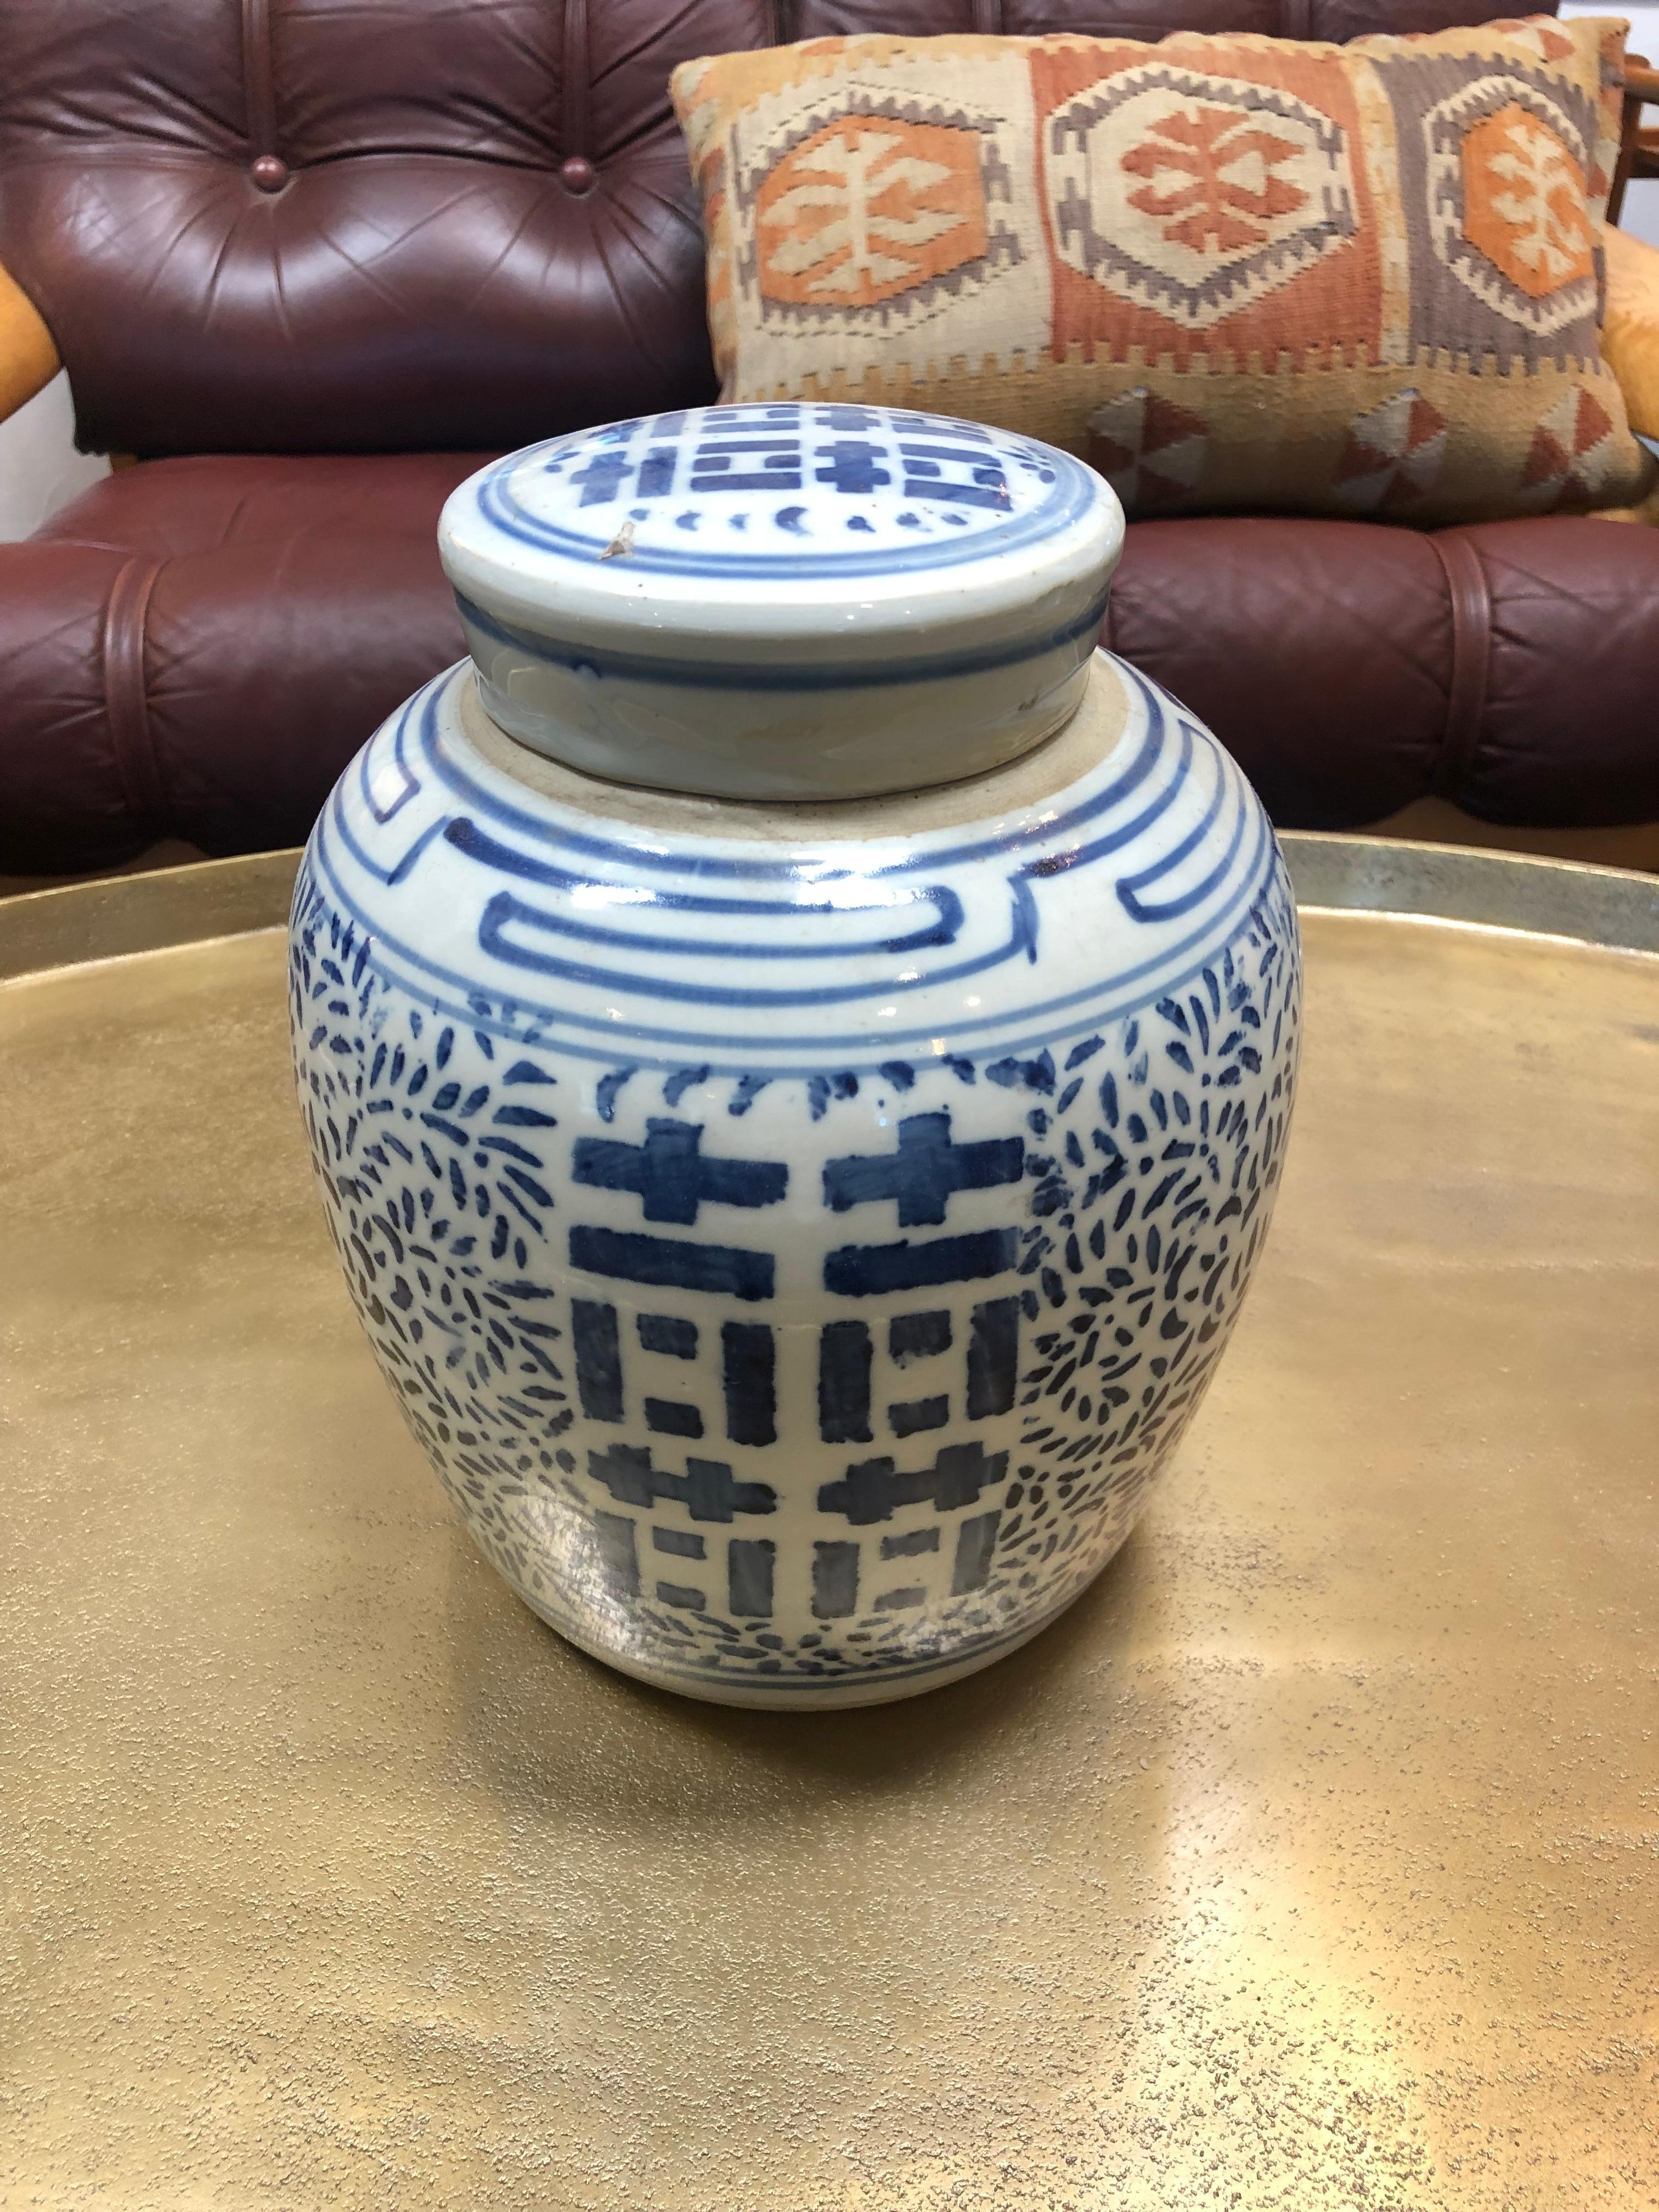 This delicate Chinese ceramic style first developed during the Tang Dynasty. The color is a traditional cobalt blue on white. The Chinese character seen on the jar symbolizes 